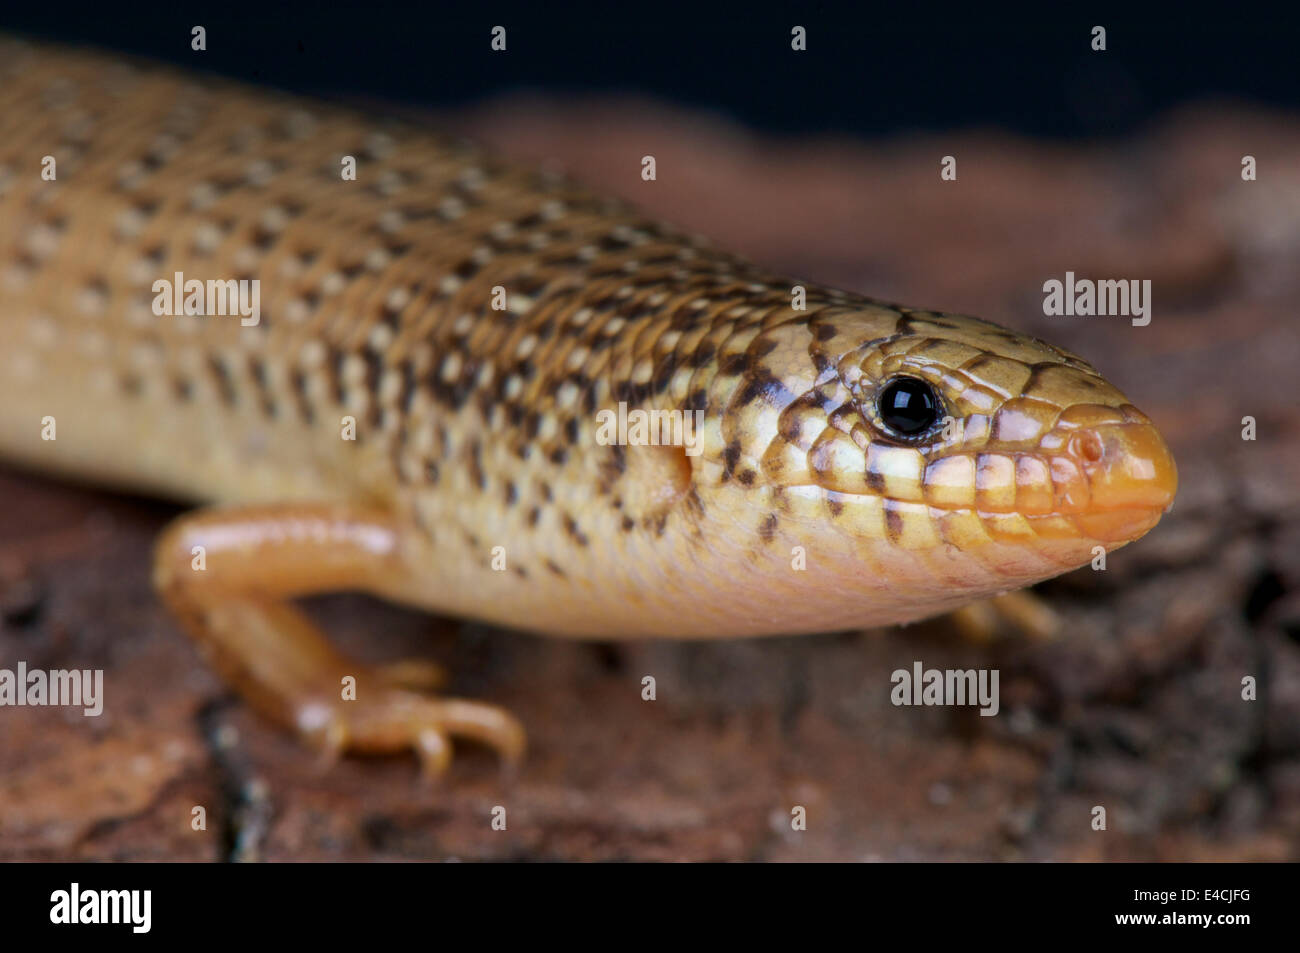 Ocellated skink / Chalcides ocellatus Foto Stock